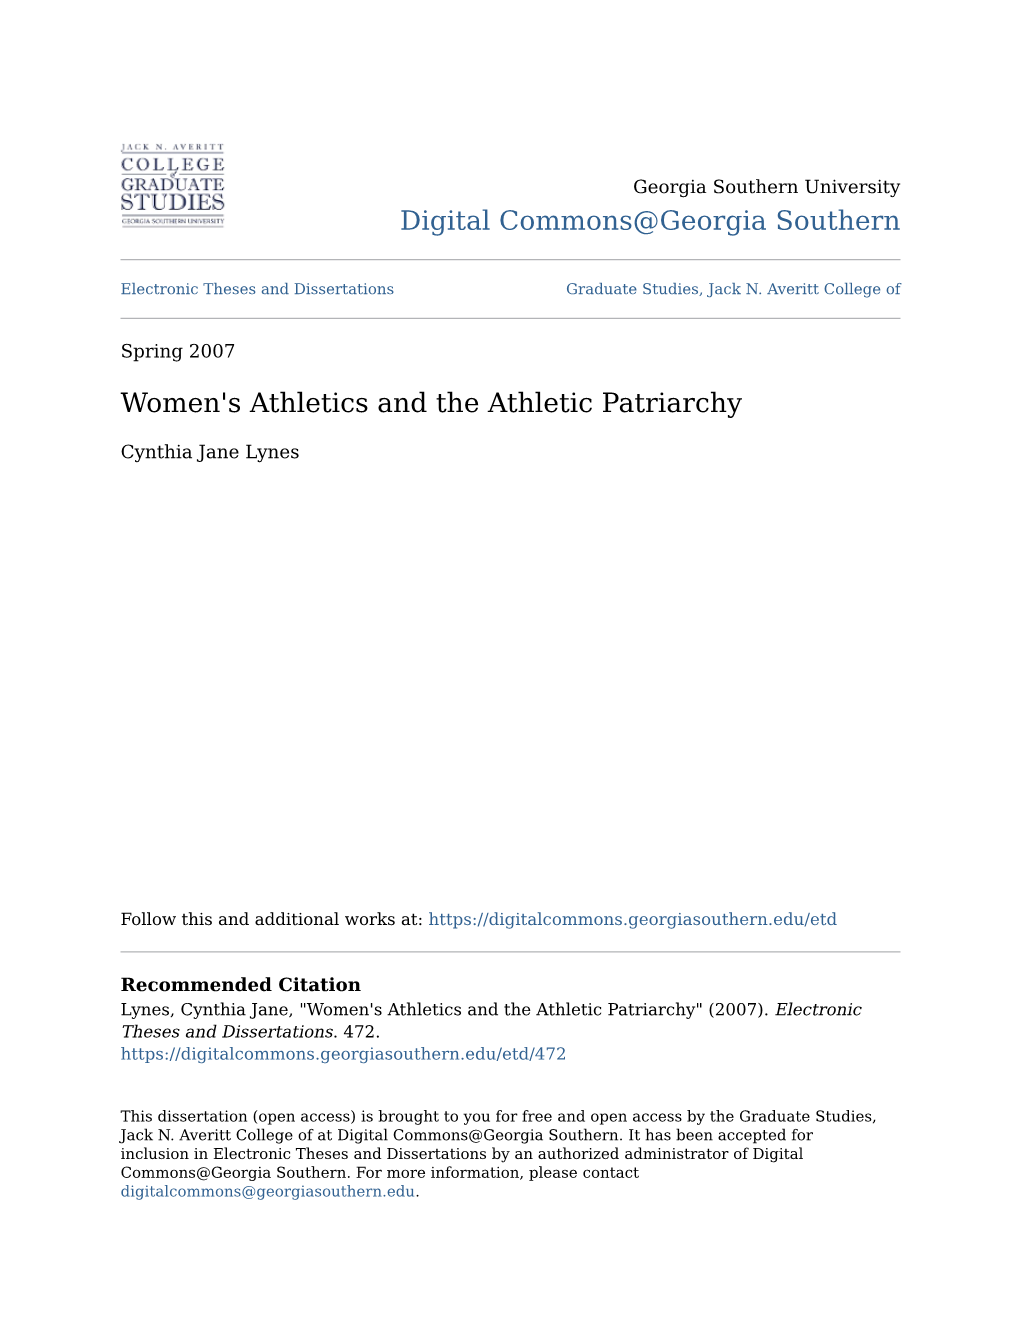 Women's Athletics and the Athletic Patriarchy